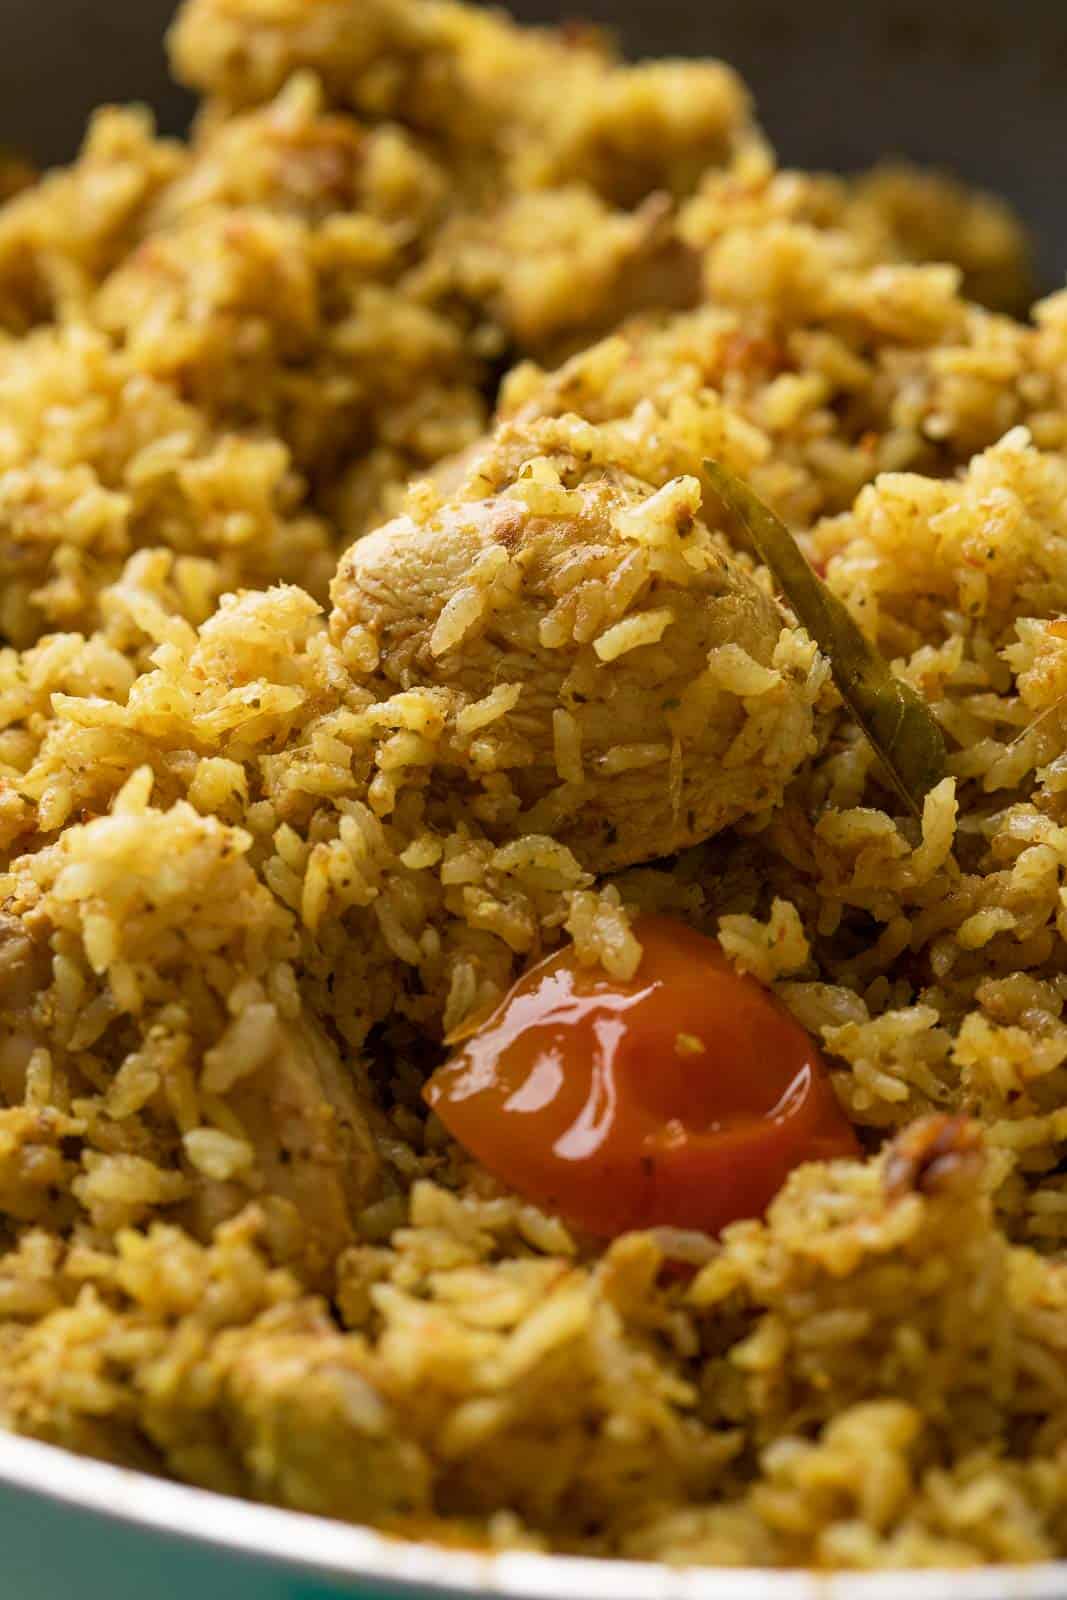 Closeup of chicken pulao to show texture of the rice